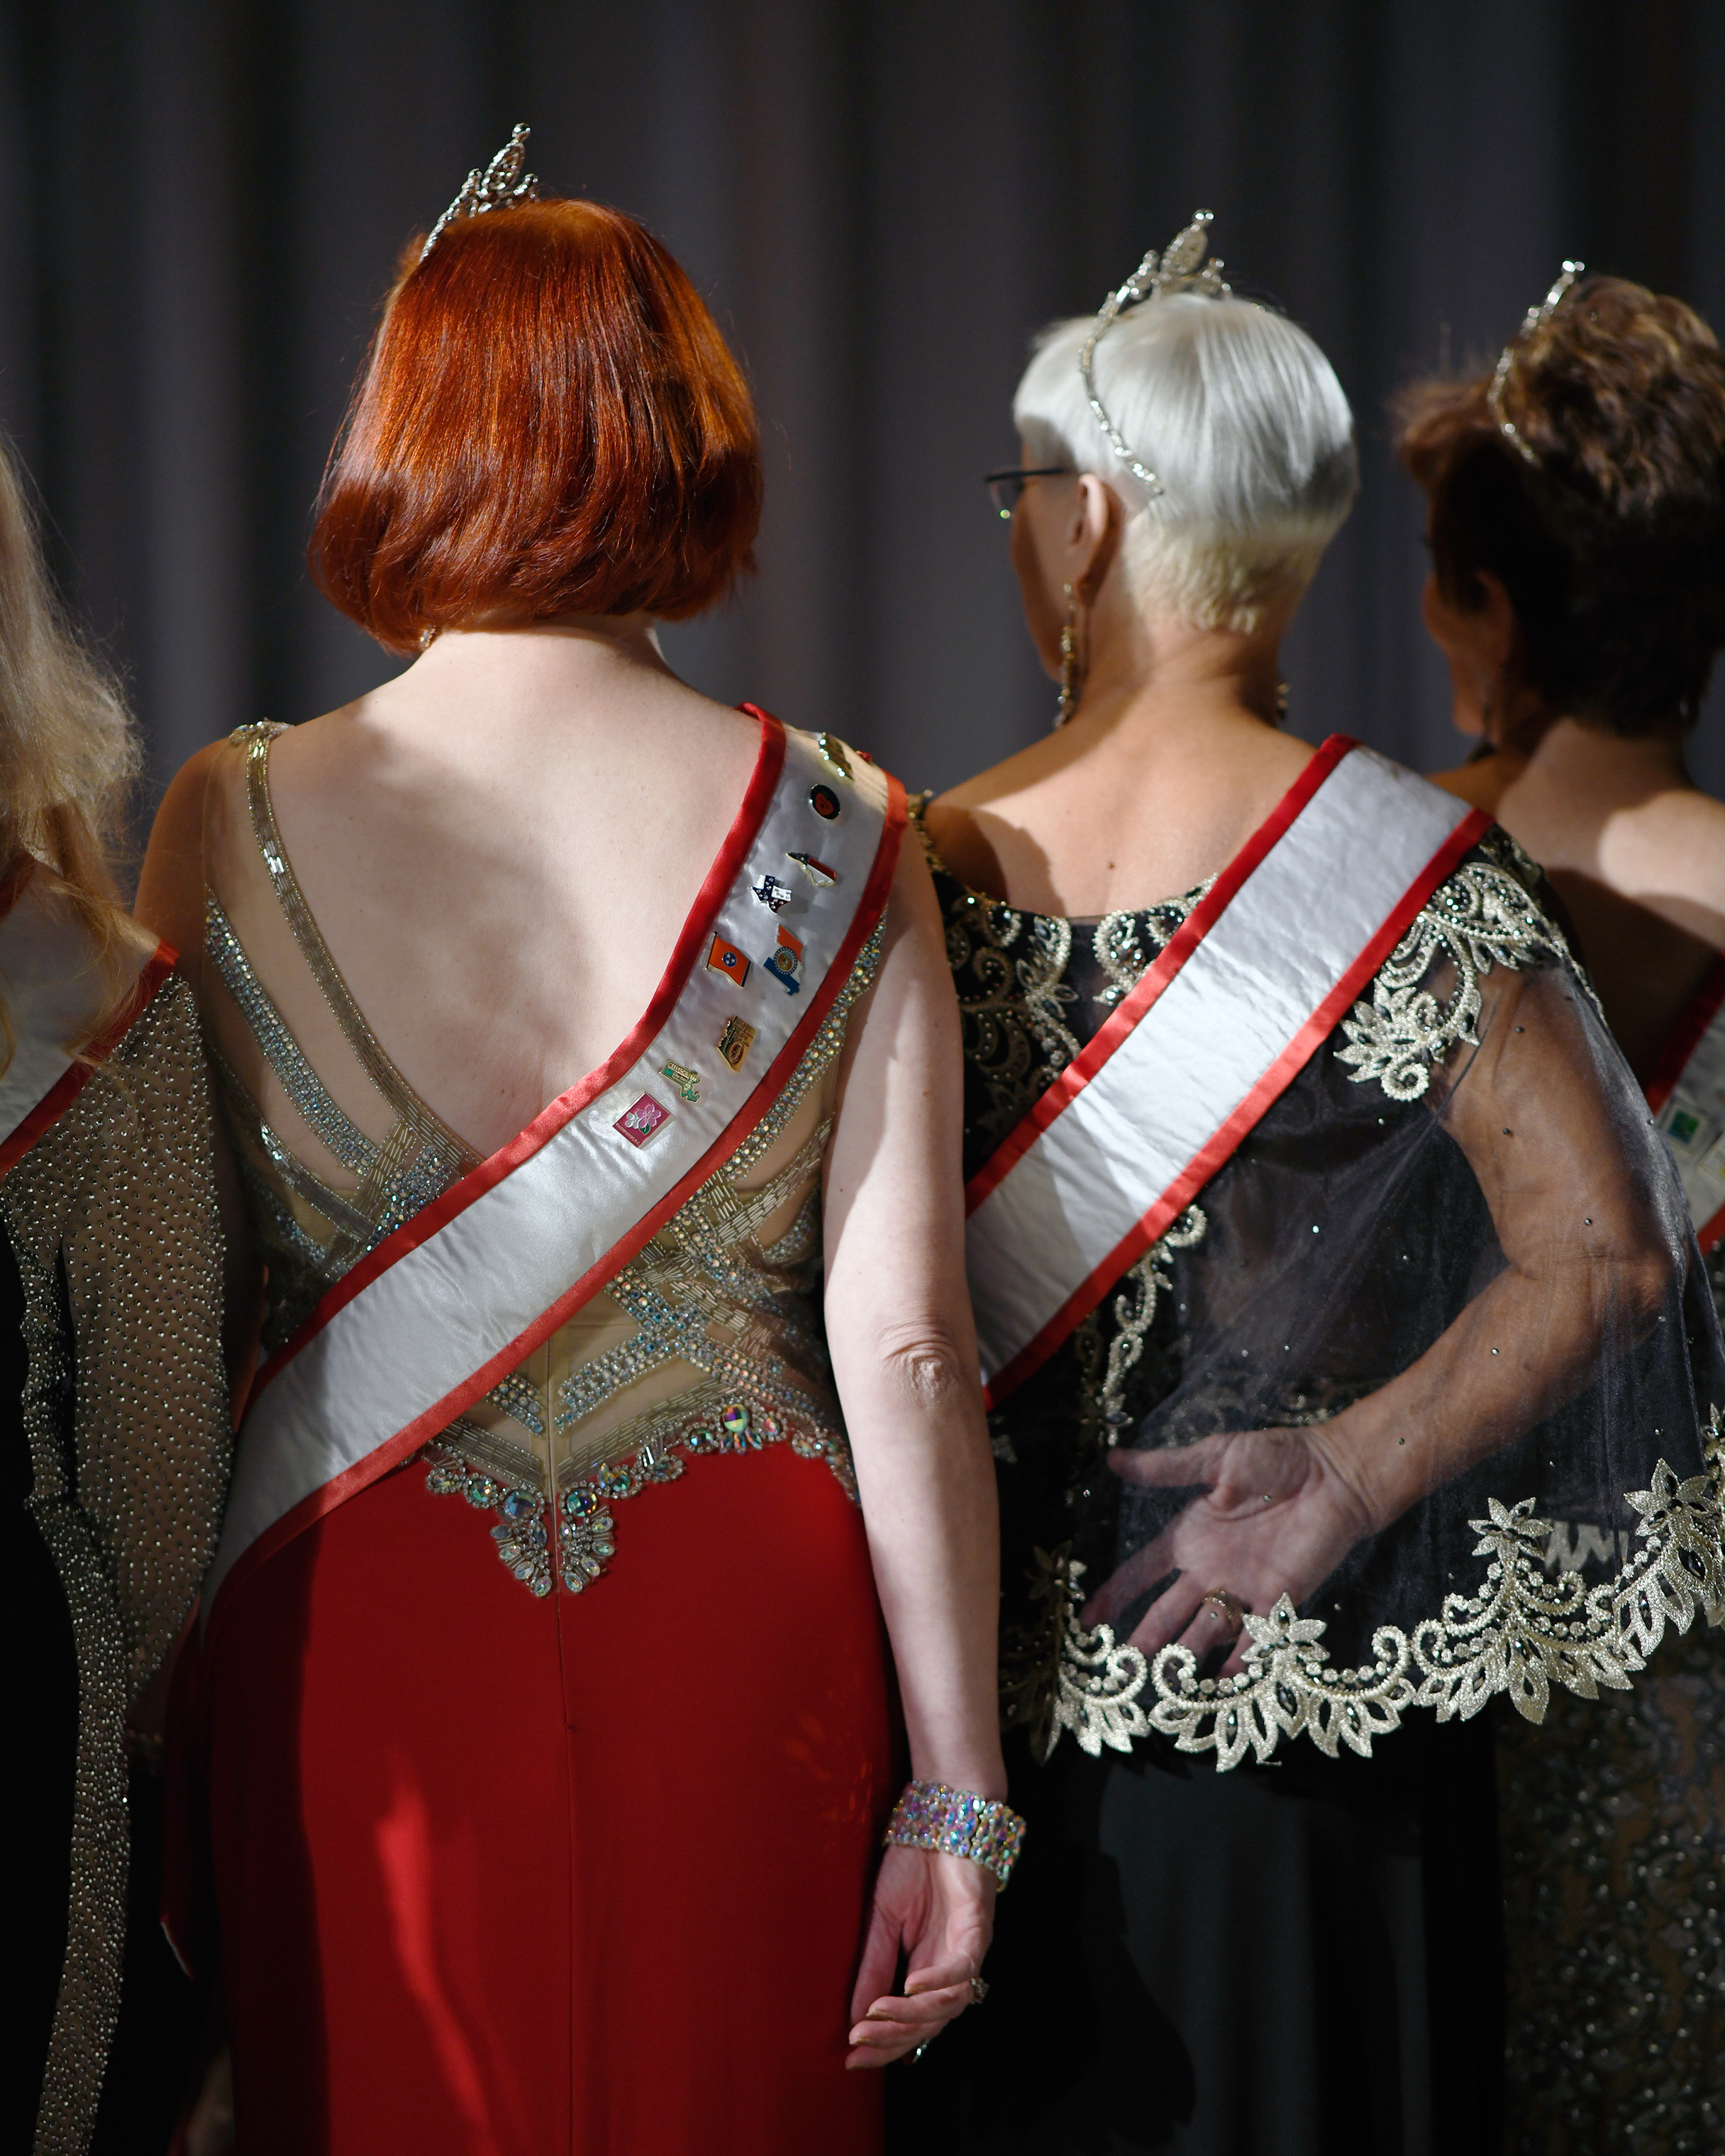 Thirty-nine women competed in the Ms. Senior America pageant in Atlantic City, N.J. (Rosa Polin for TIME)